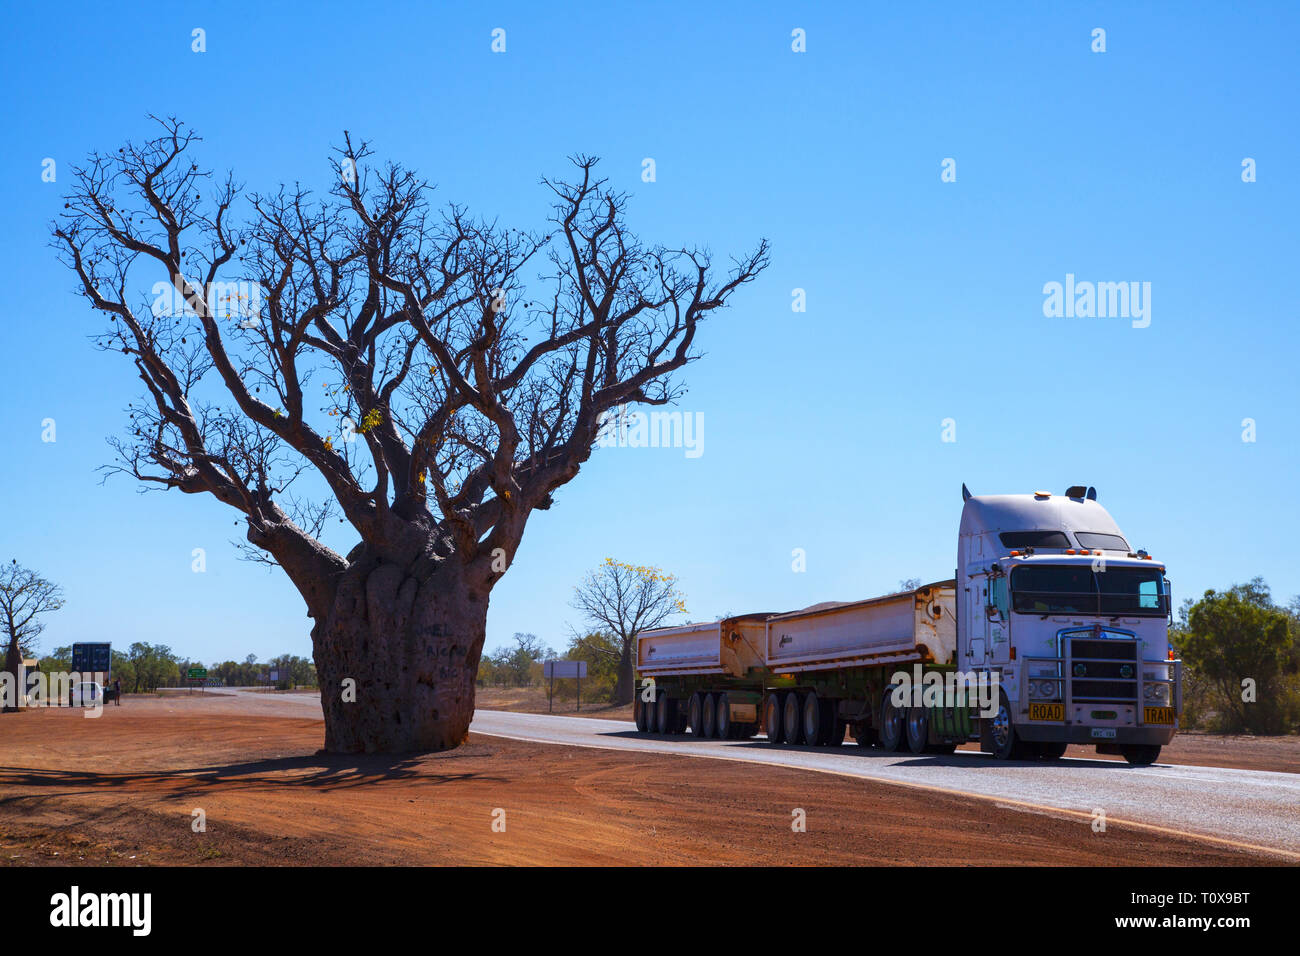 The Kimberley, Derby - July 2016: A road train rushes past the iconic Boab tree of the Kimberley. Stock Photo